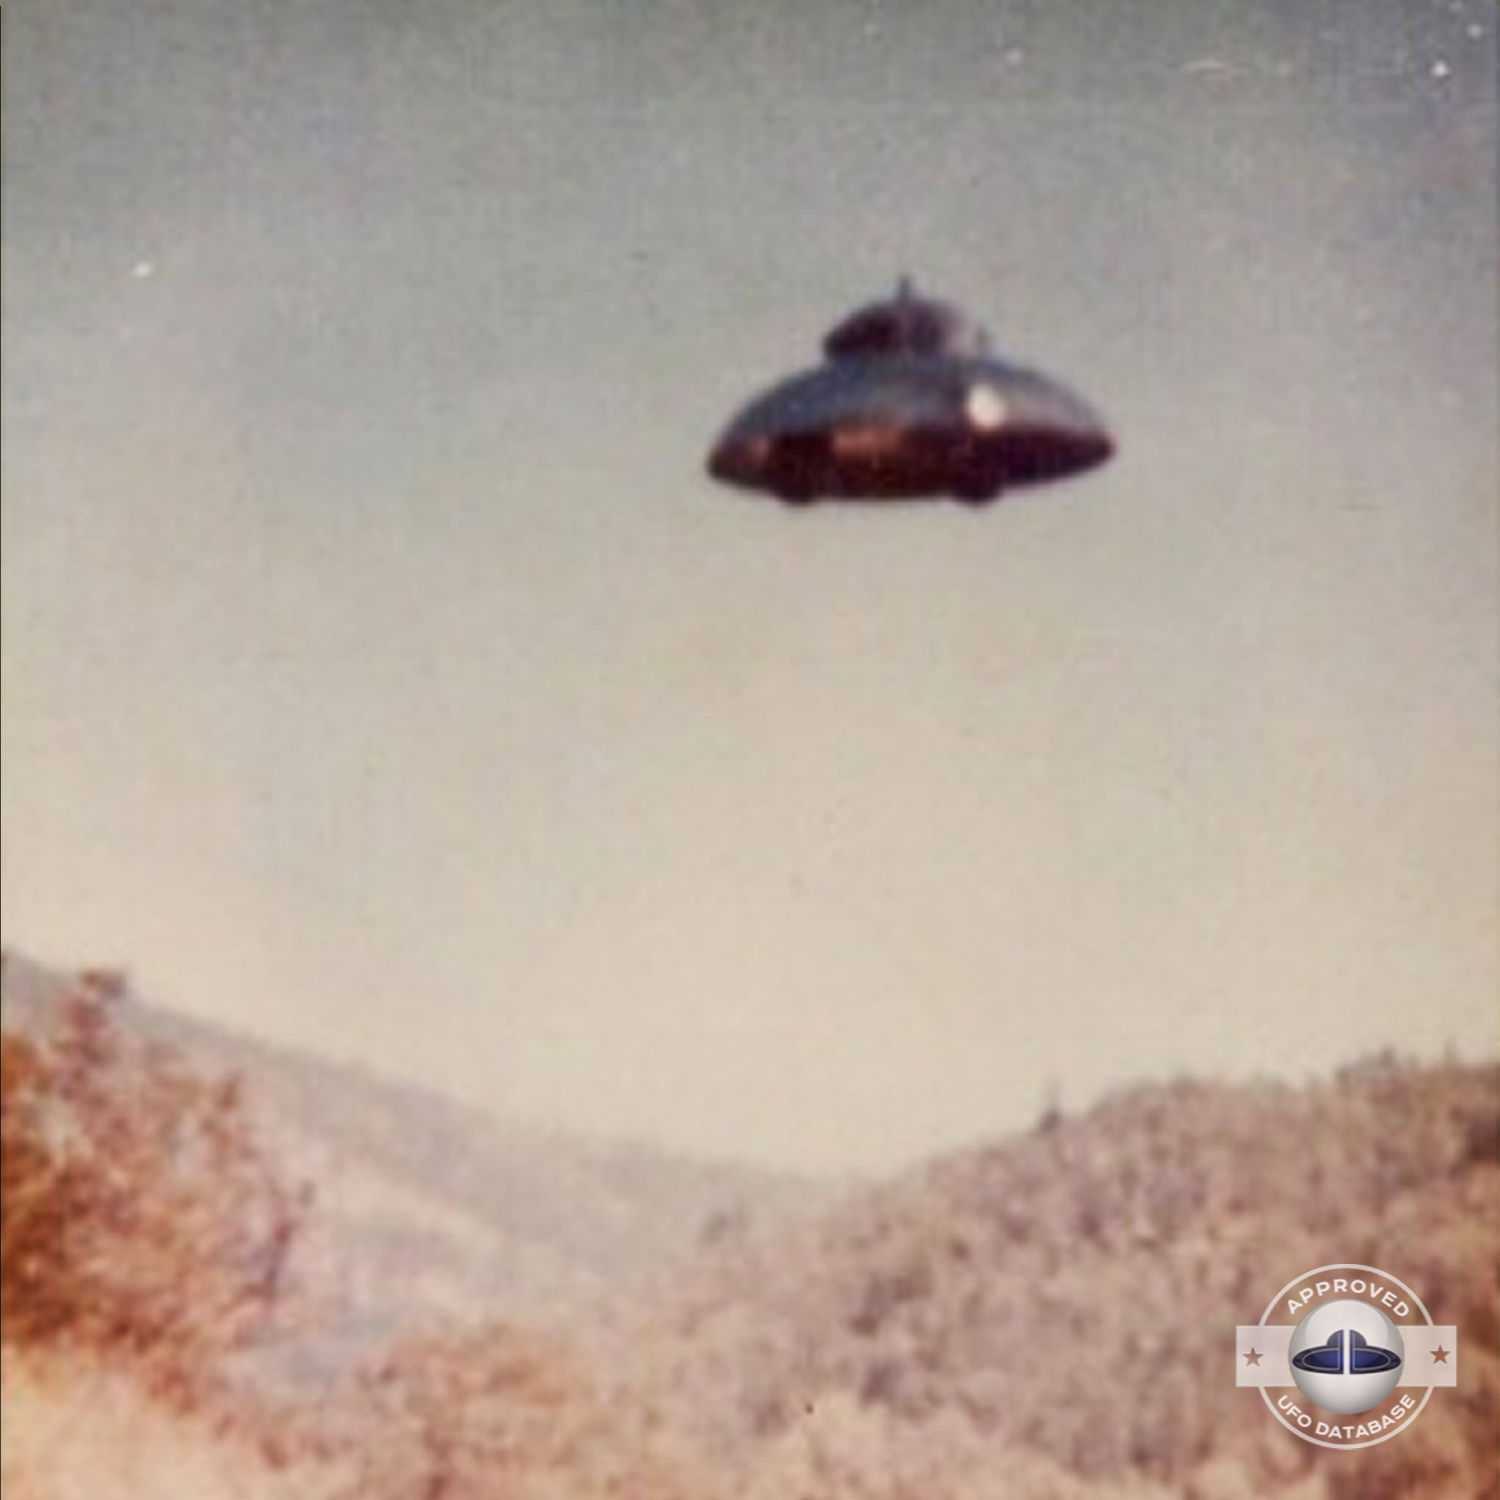 This UFO picture has been in several reports and controversies, 1970s UFO Picture #138-3